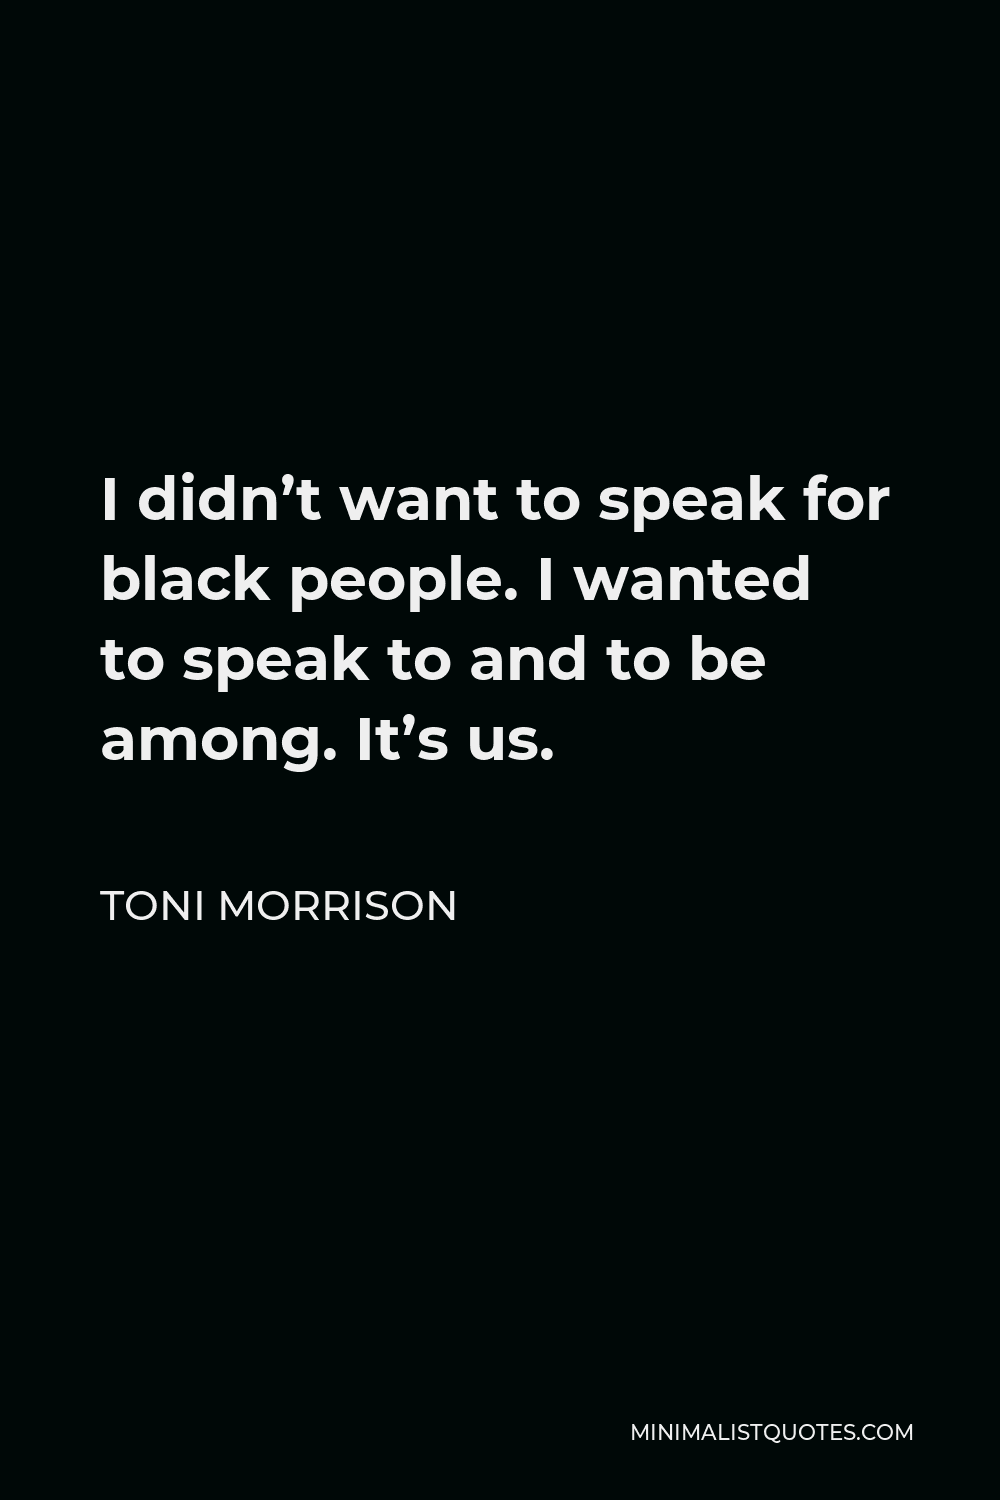 Toni Morrison Quote - I didn’t want to speak for black people. I wanted to speak to and to be among. It’s us.